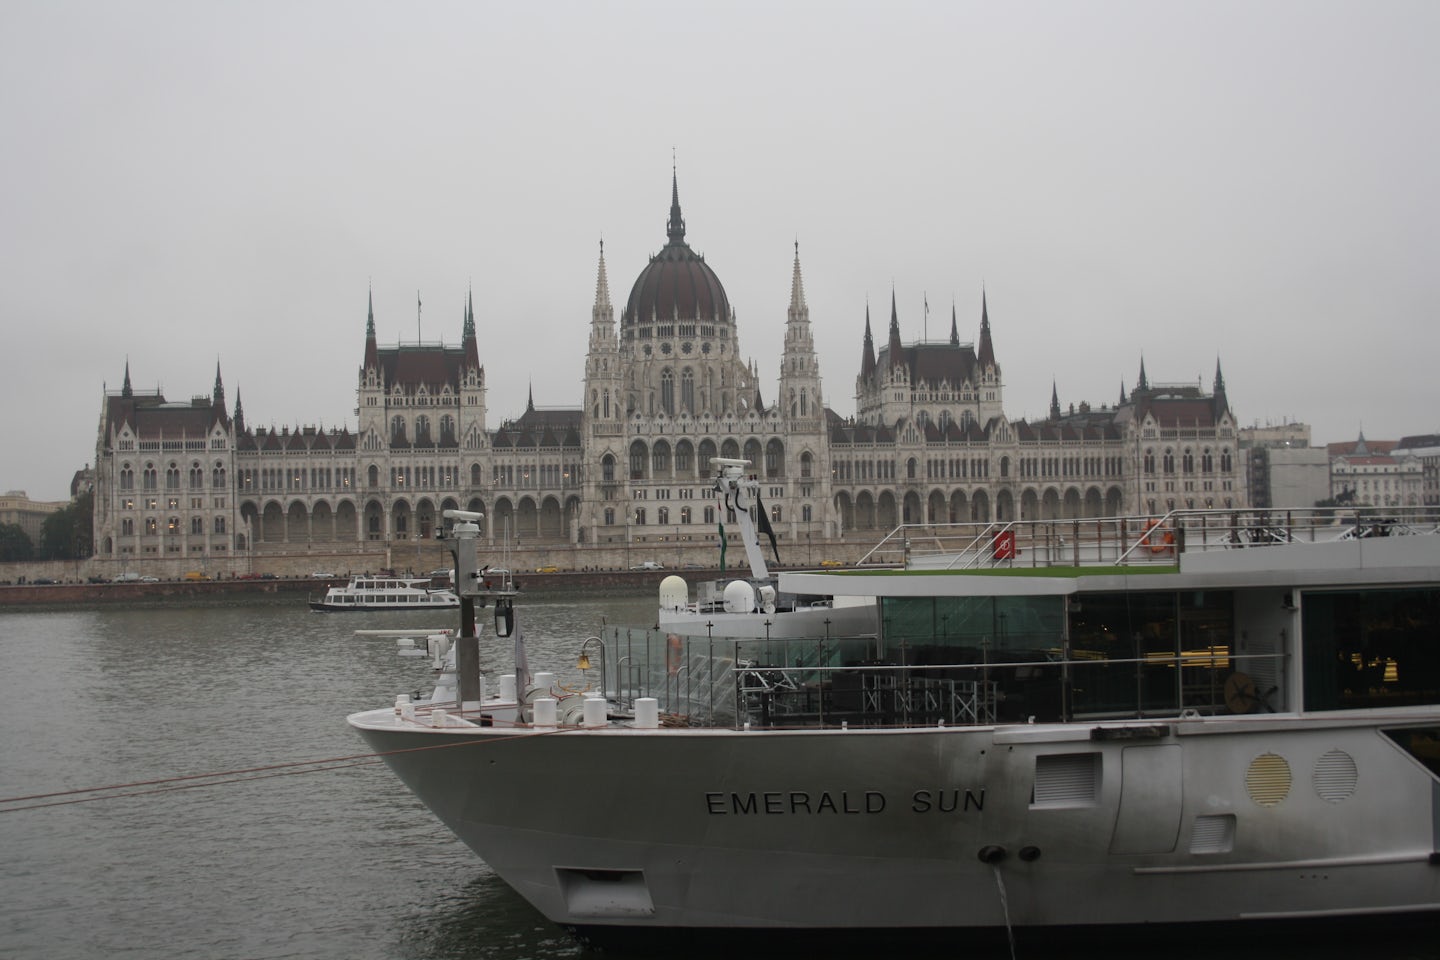 The Emerald Sun moored opposite the Hungarian Parliament in Budapest.